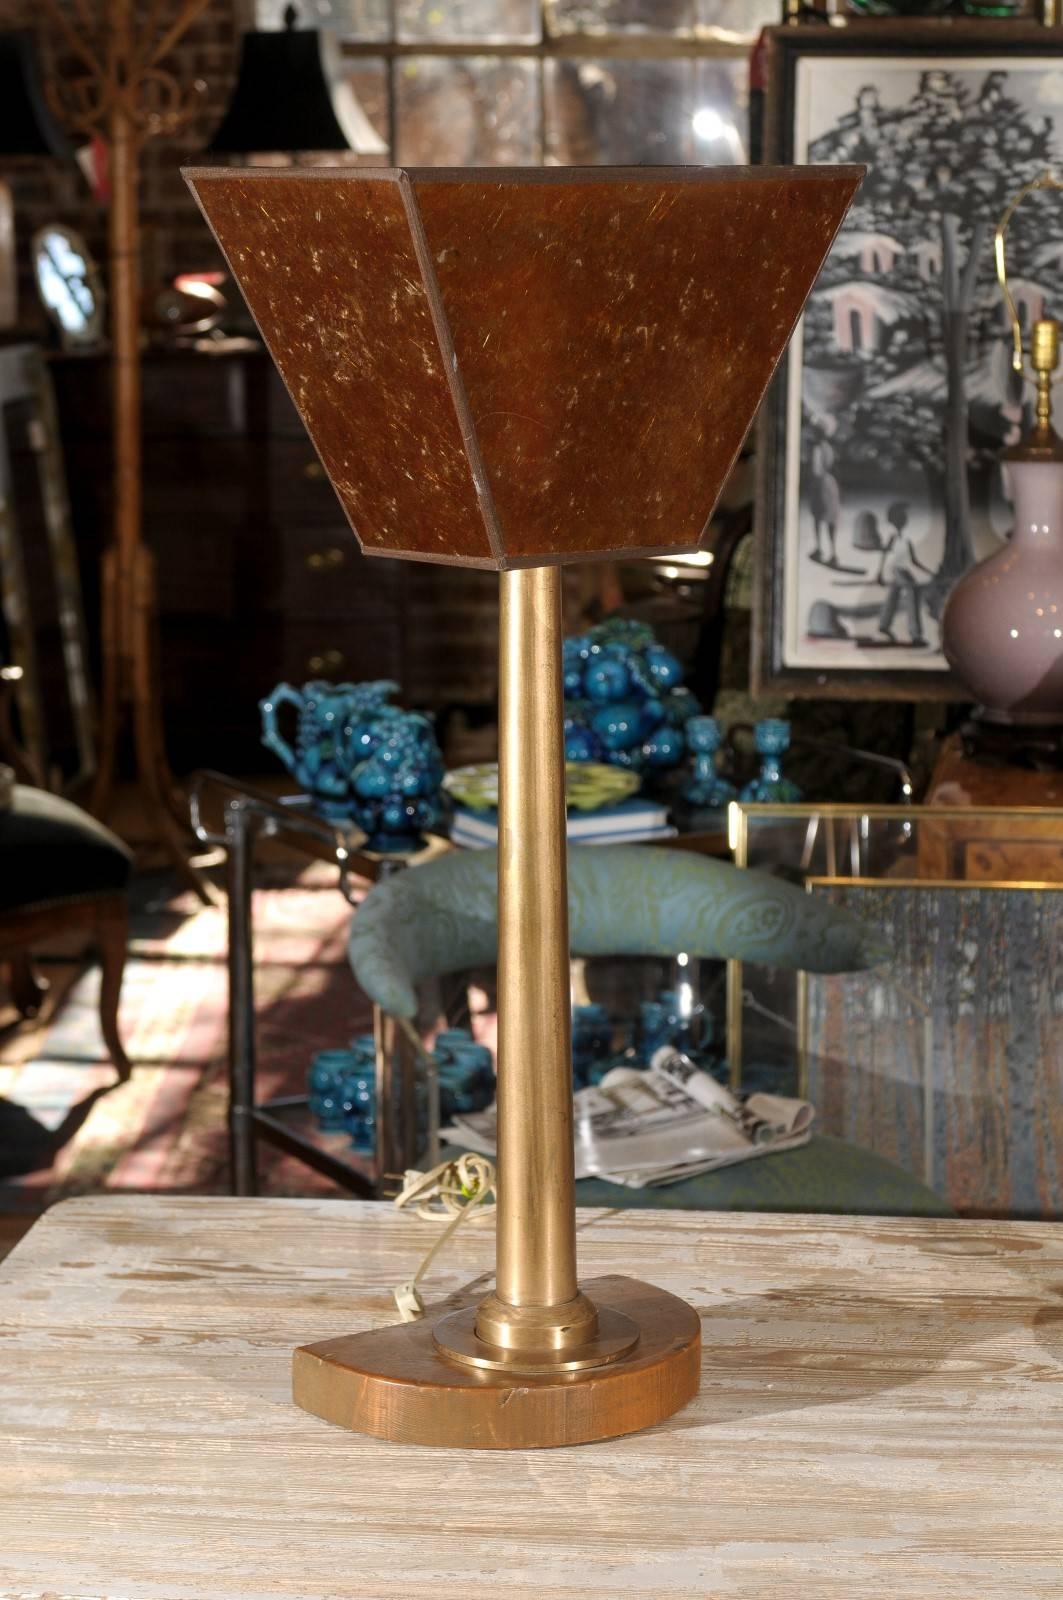 Tall pair of early 20th century Machine Age lamps with amber colored mica uplights, sleek bronze shafts, and mounted to demilune wooden bases.